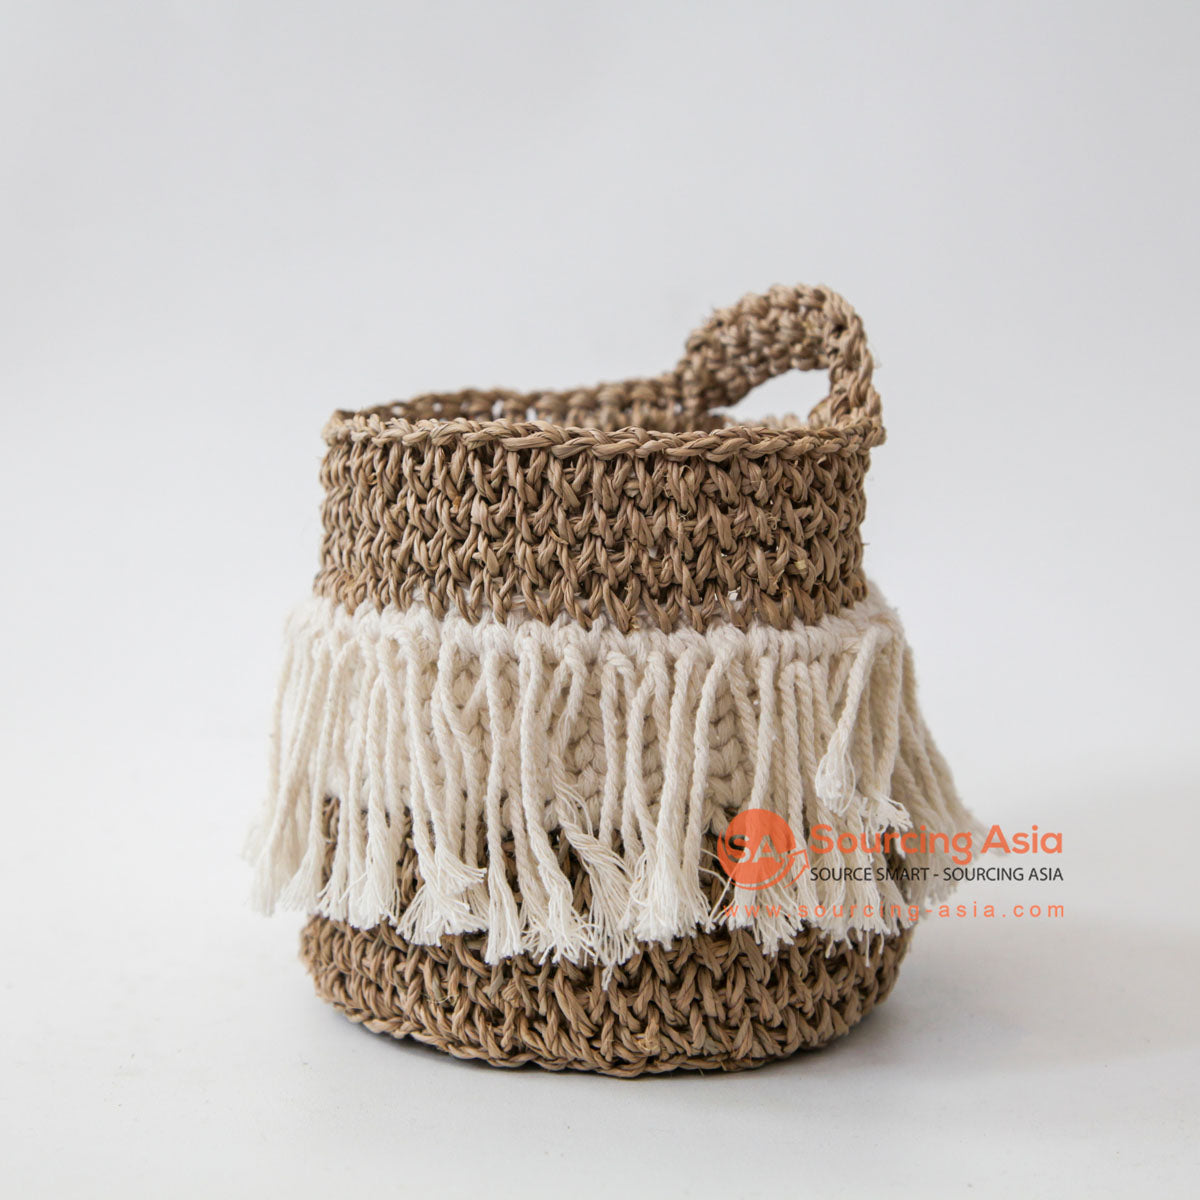 DHL133 NATURAL MACRAME SMALL BASKET WITH HANDLE AND FRINGE